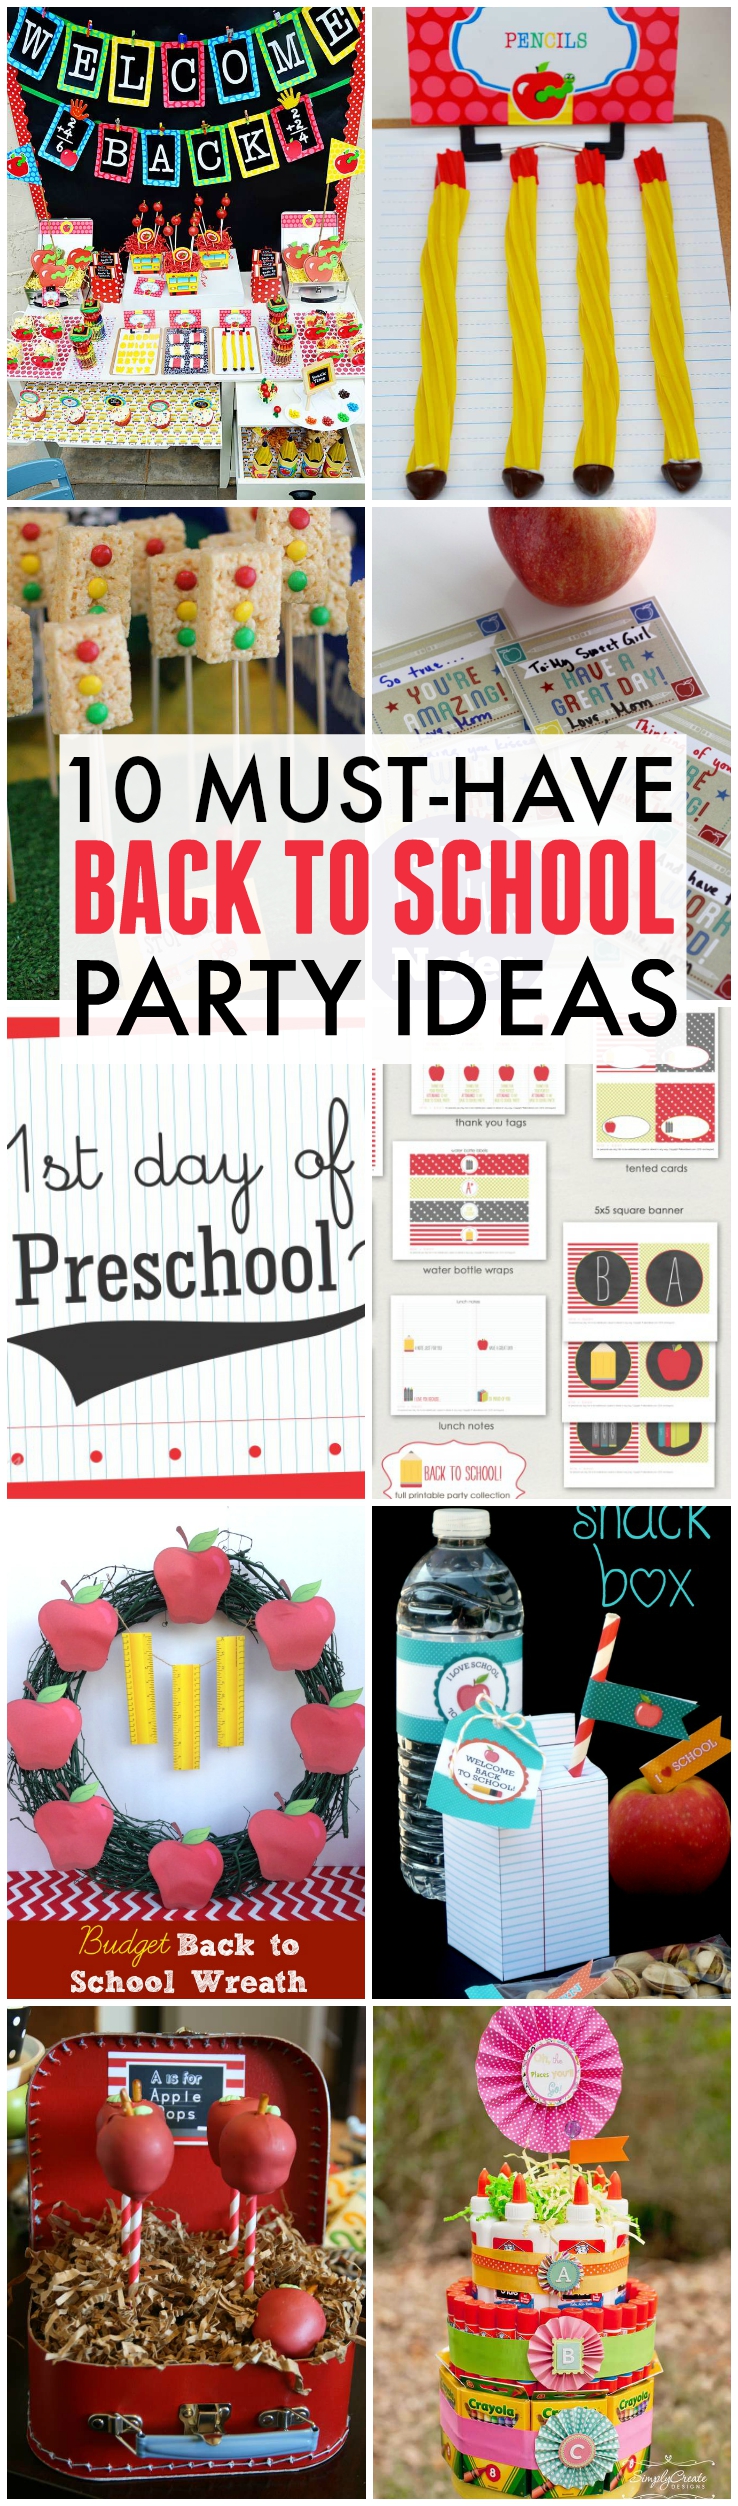 free-back-to-school-party-printables-from-ellen-bean-catch-my-party